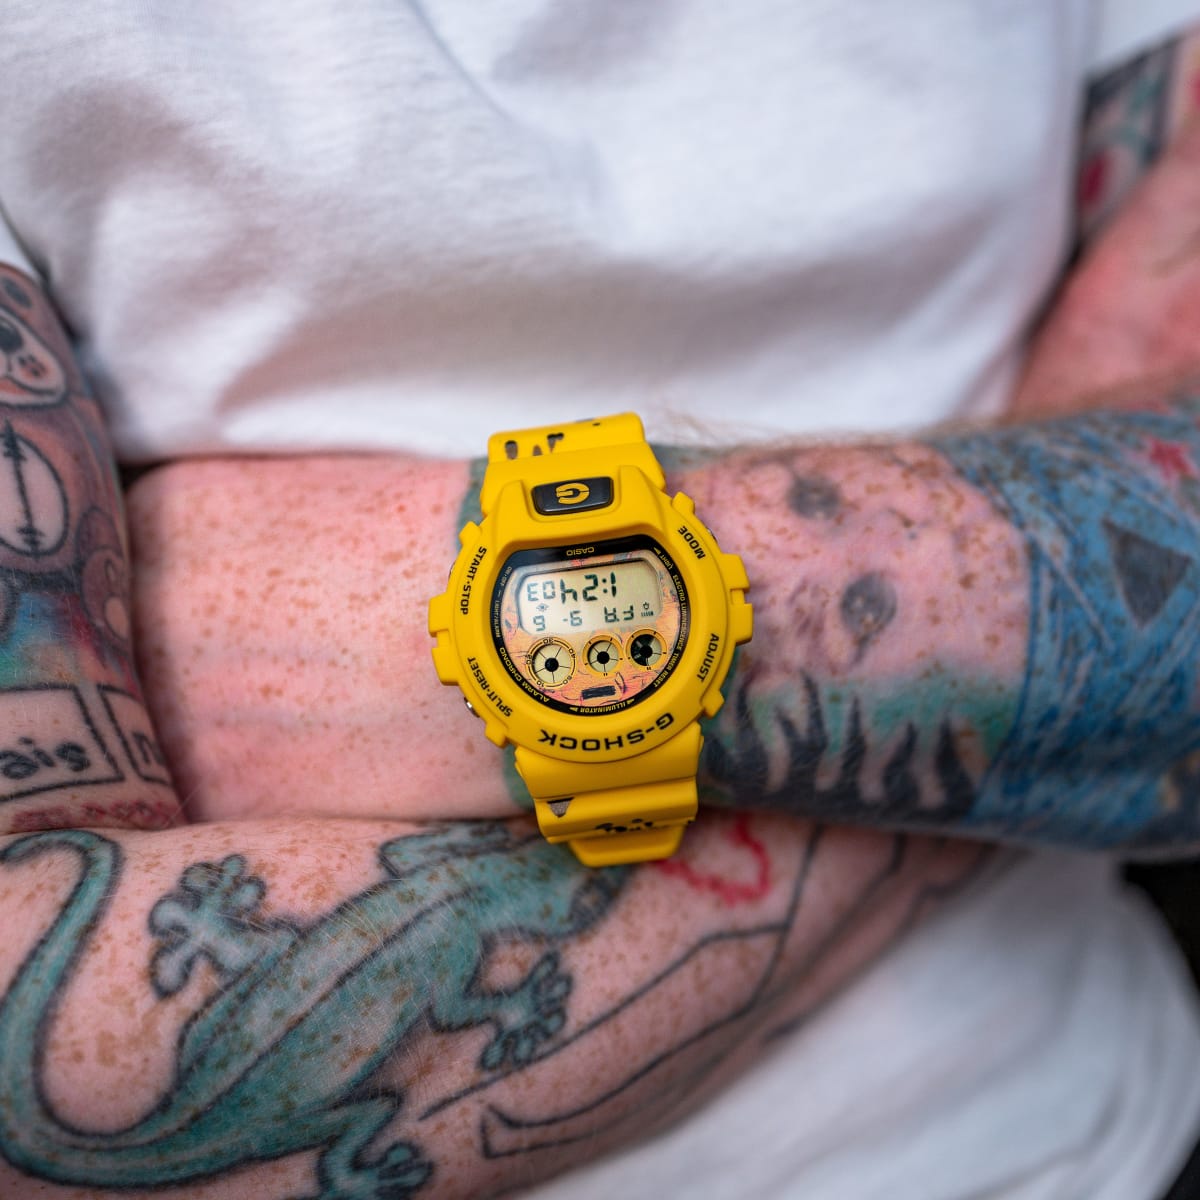 Ed Sheeran teams up with Hodinkee and G-Shock for a limited